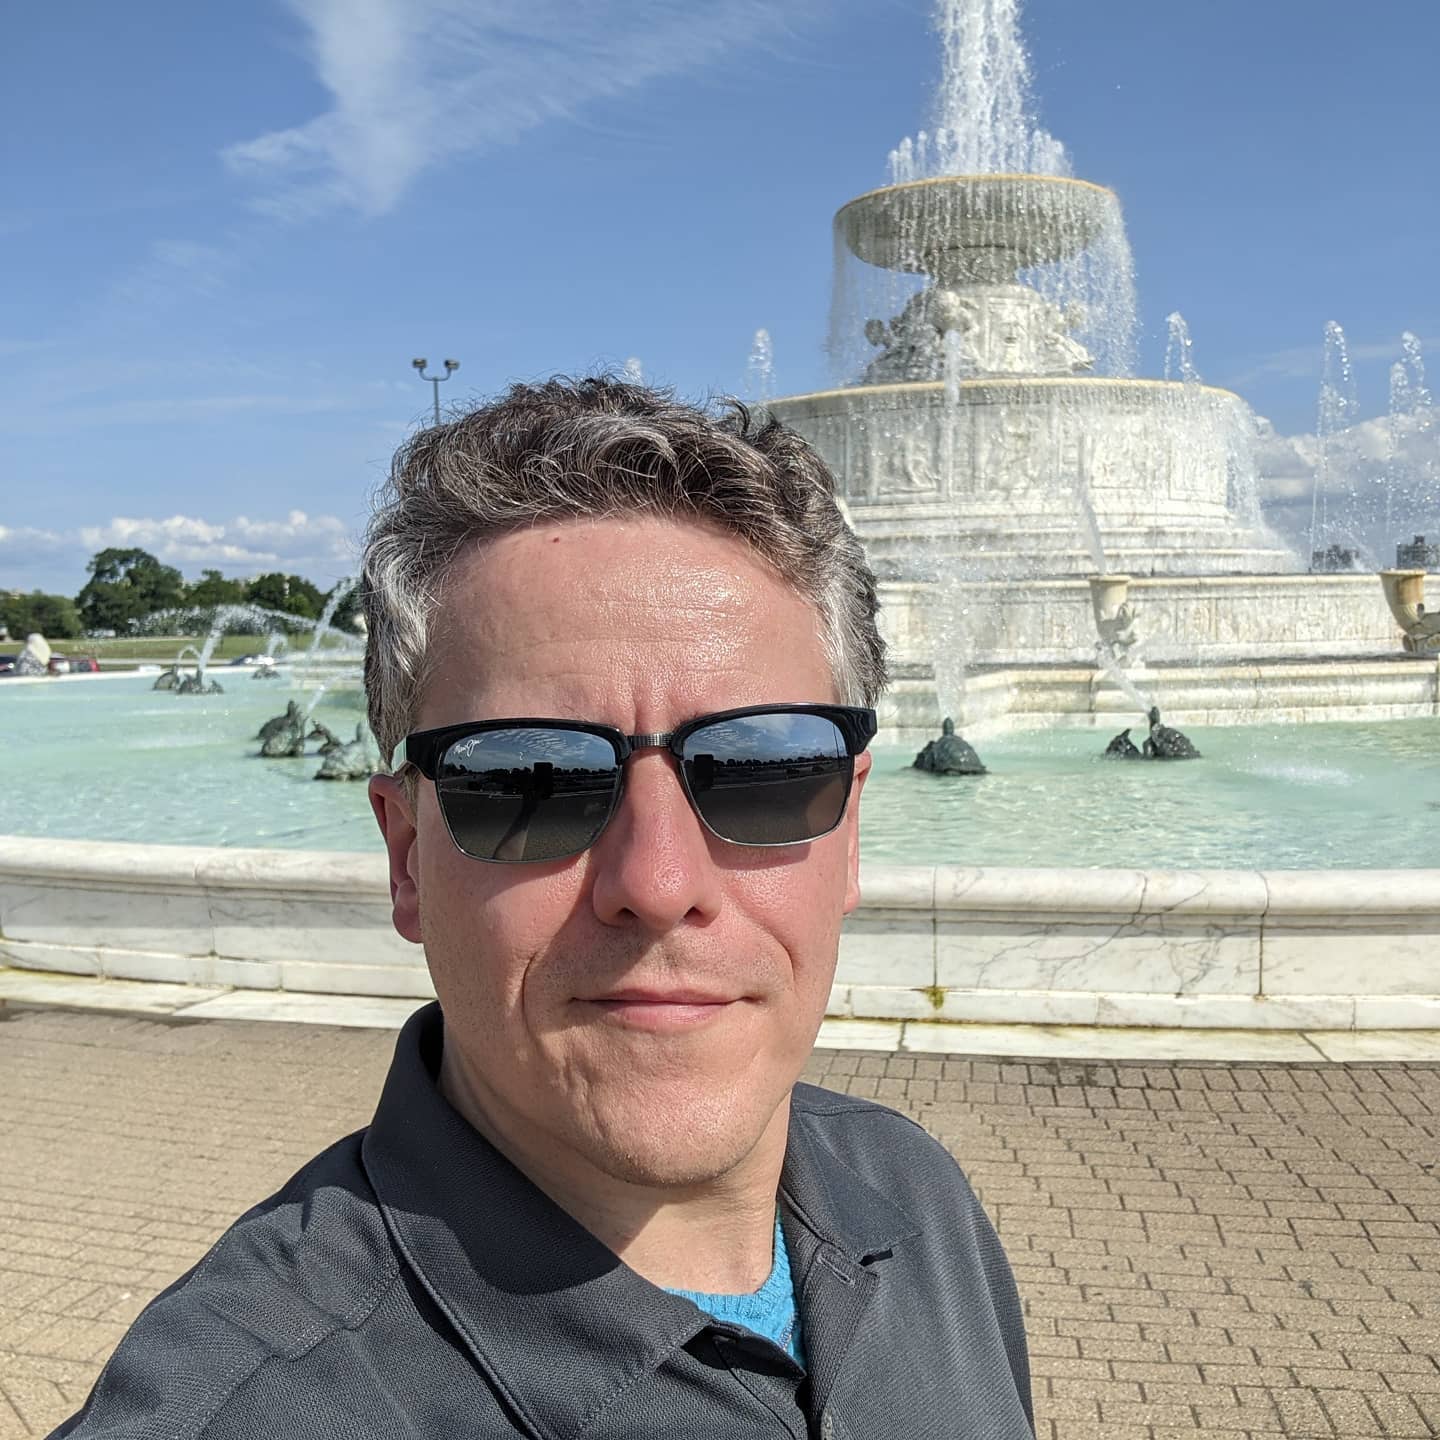 Of course I had to stop by the iconic #belleisle fountain #detroit